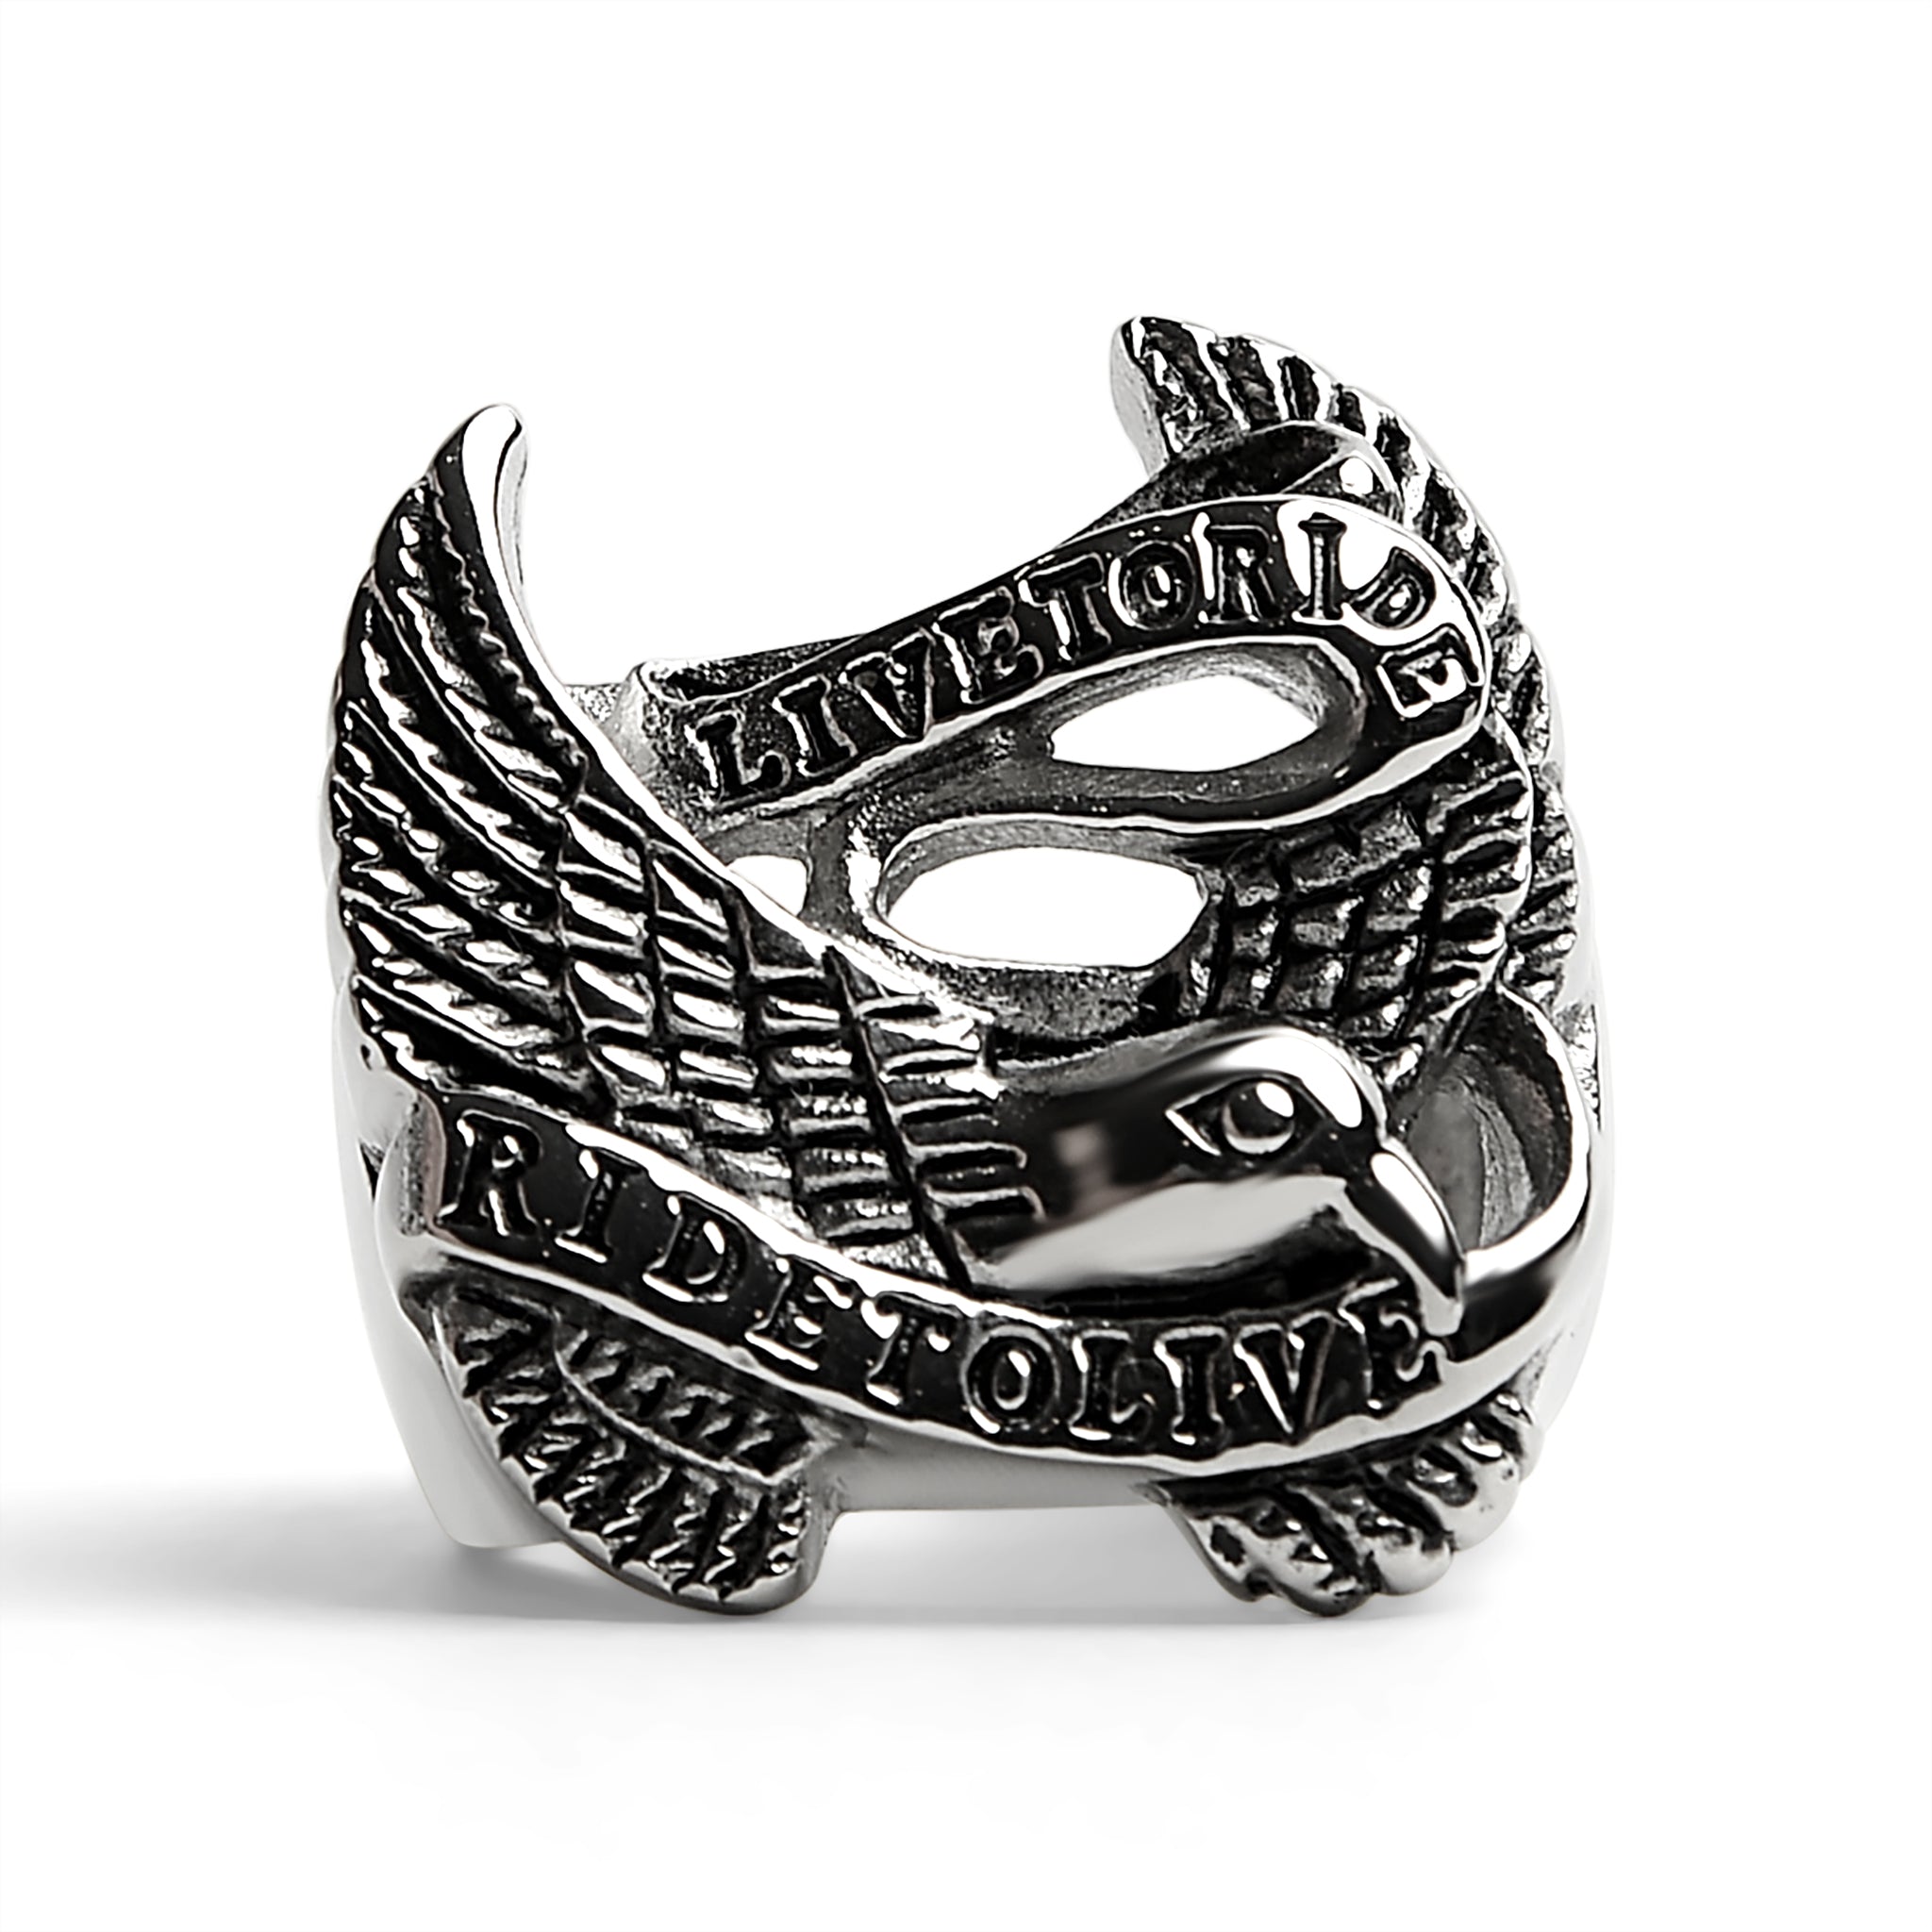 Stainless Steel "Live To Ride" "Ride To Live" Eagle Biker Ring / SCR3077